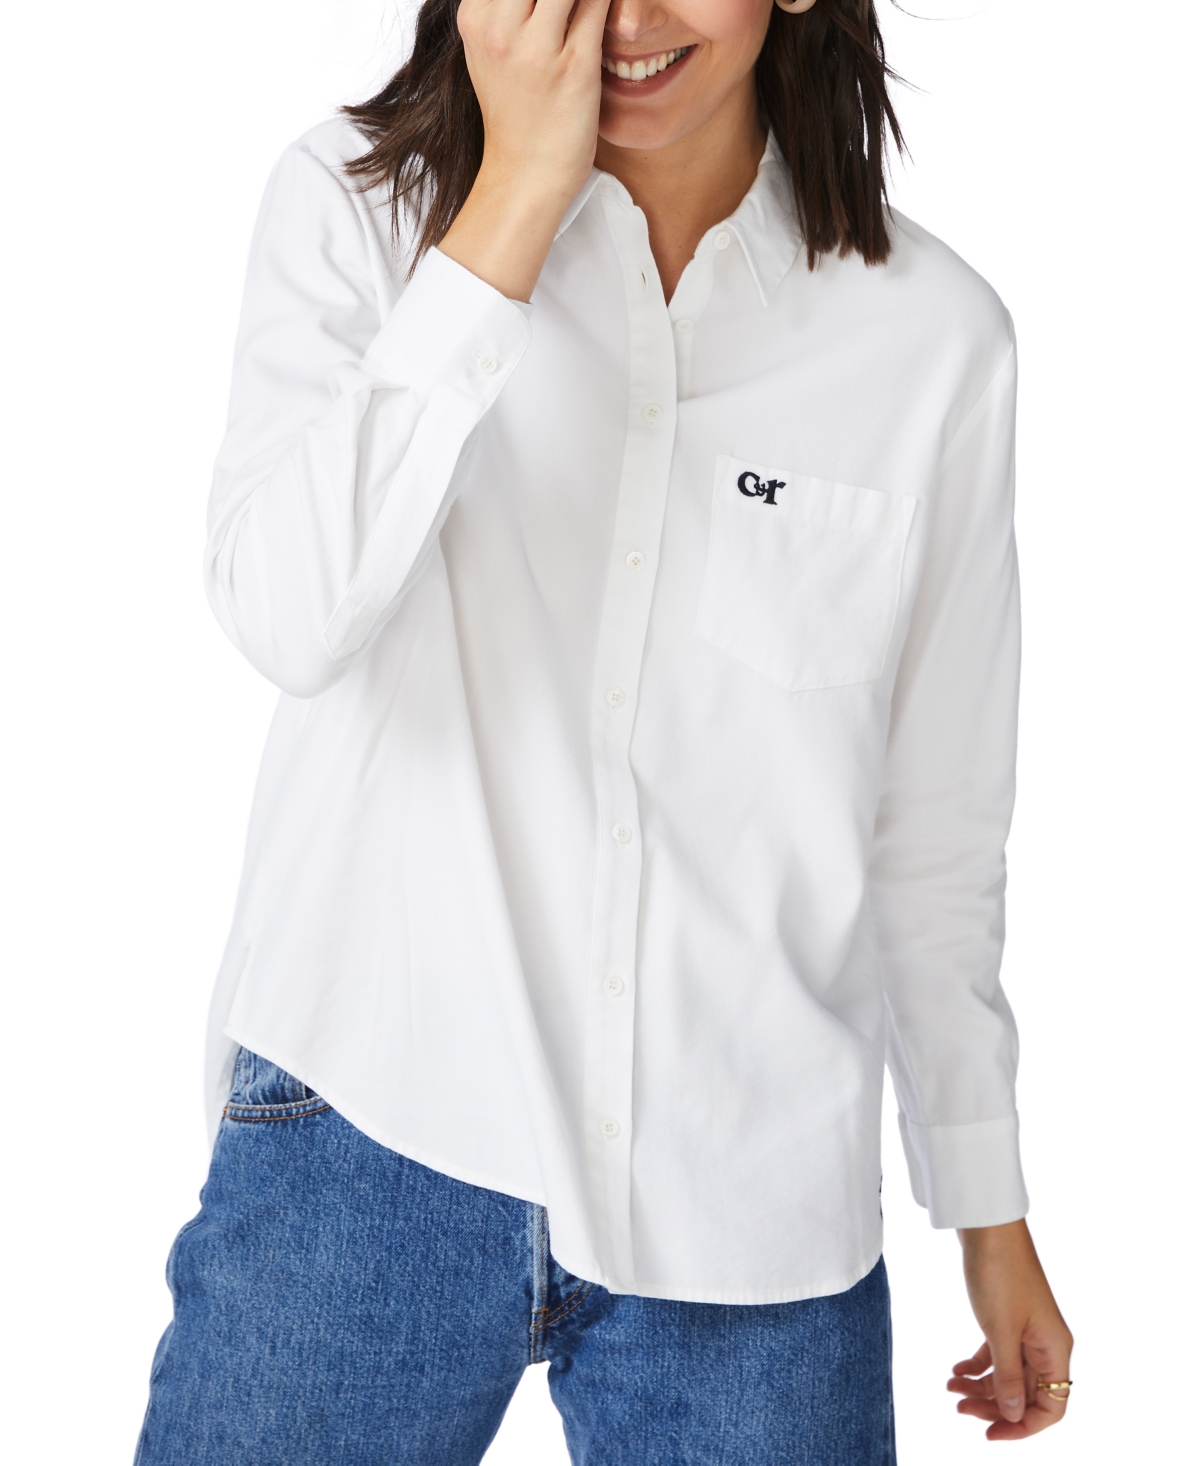 Women's Embroidered Pocket Cotton Shirt - Ultra White